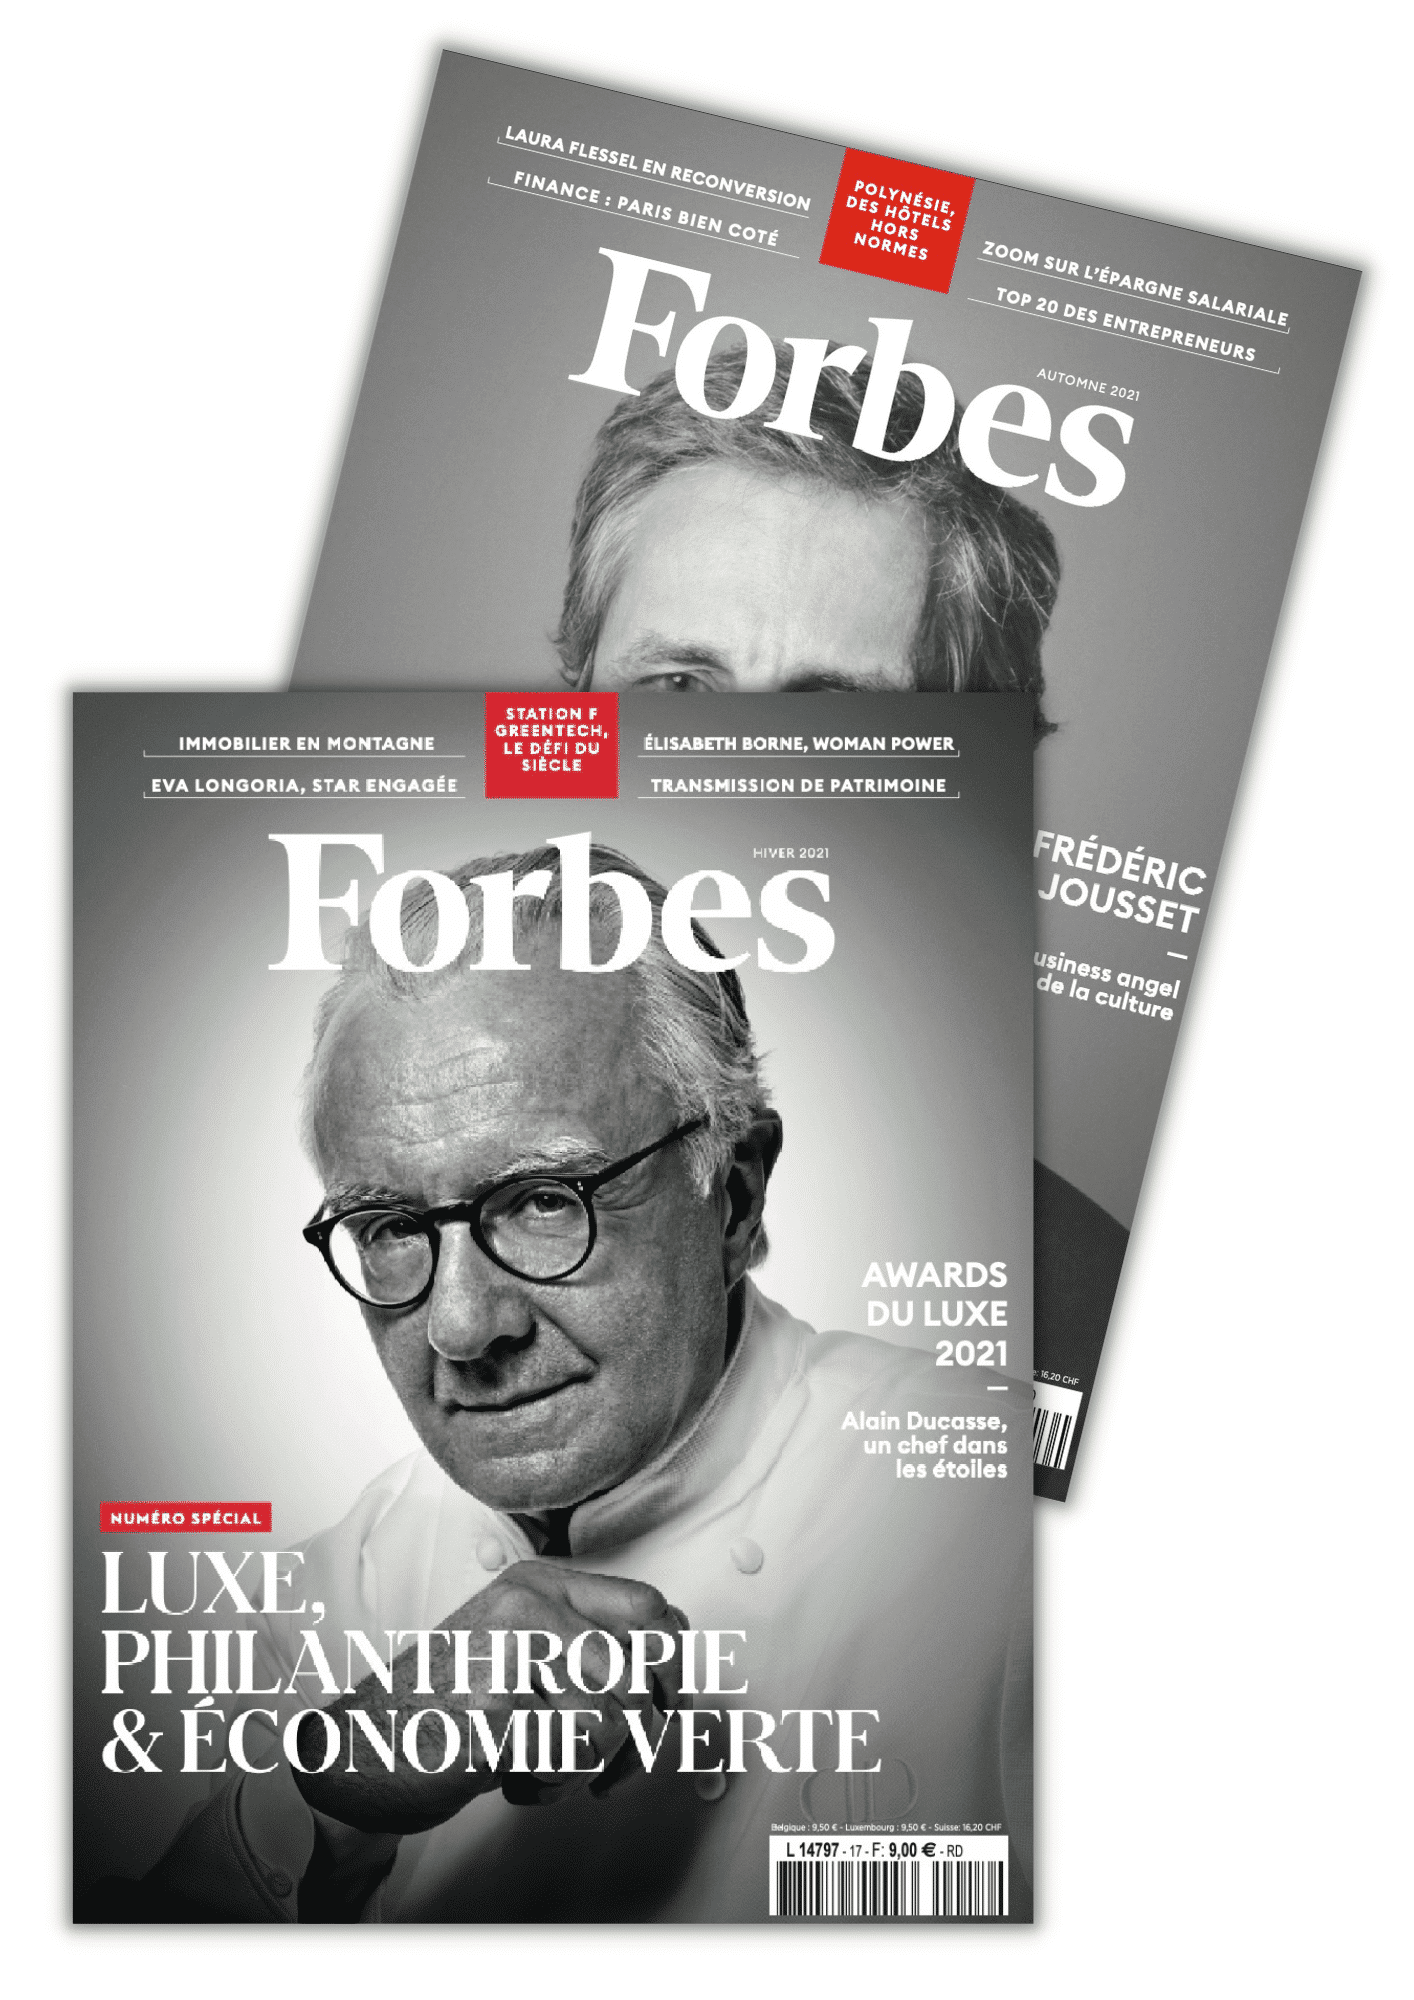 Couverture-magazine-Forbes-1-1